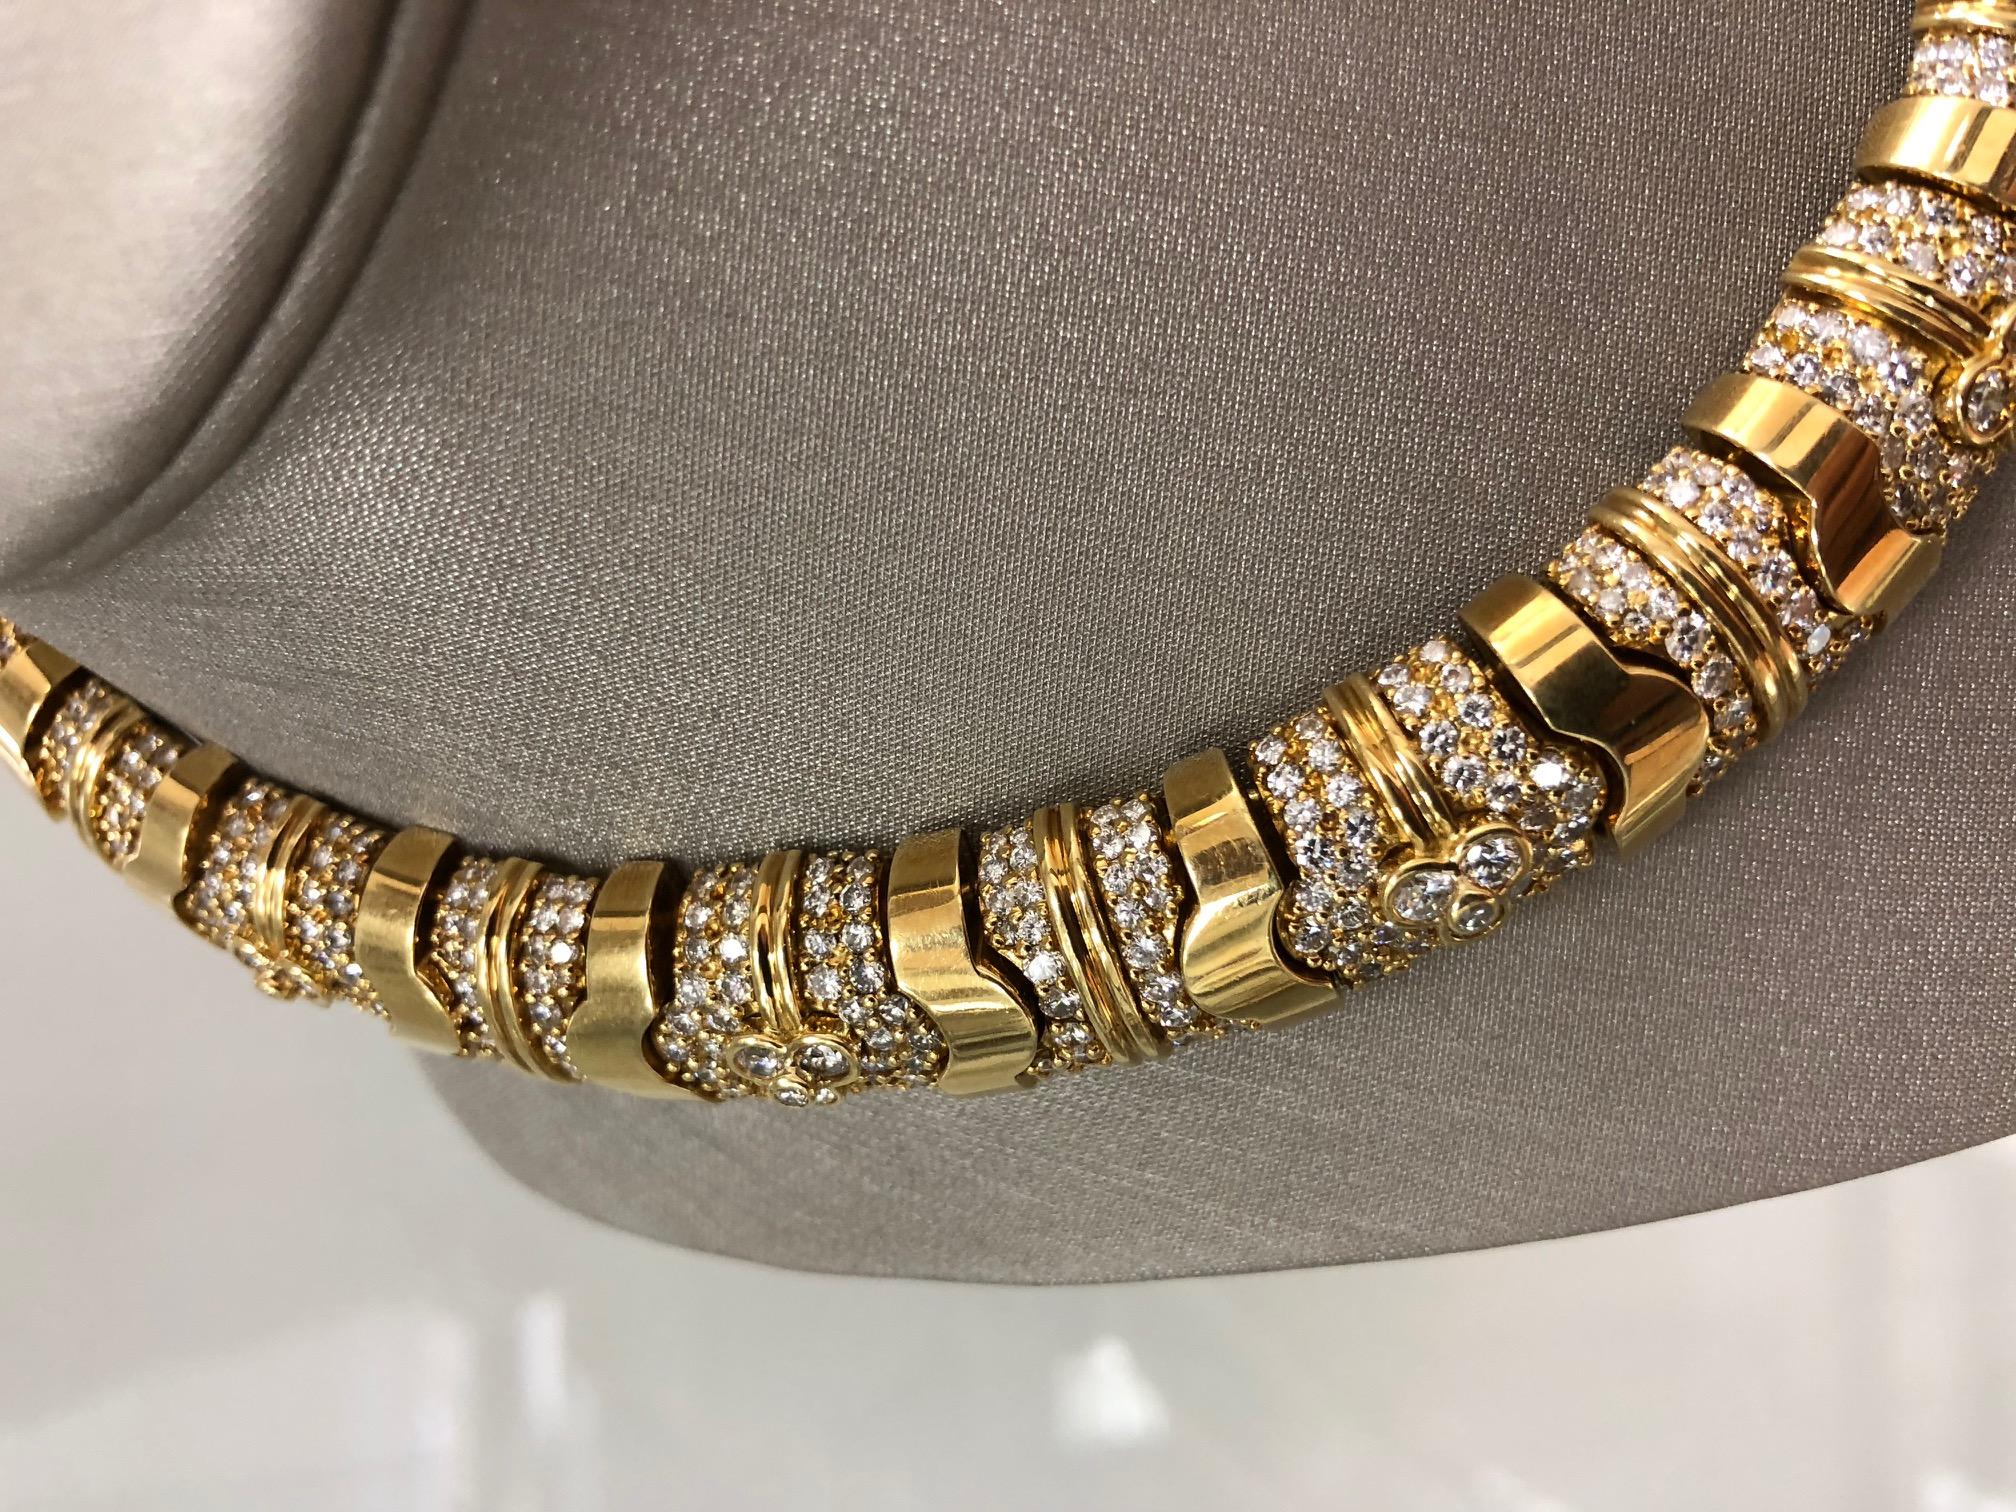 The collar necklace, crafted in 18K gold,  choker length, is set with approximately 1040 full cut round diamonds totaling approximately 33.00 carats. The diamonds are approximately G-I Color VS-SI Clarity, and are bead and bezel set in geometric